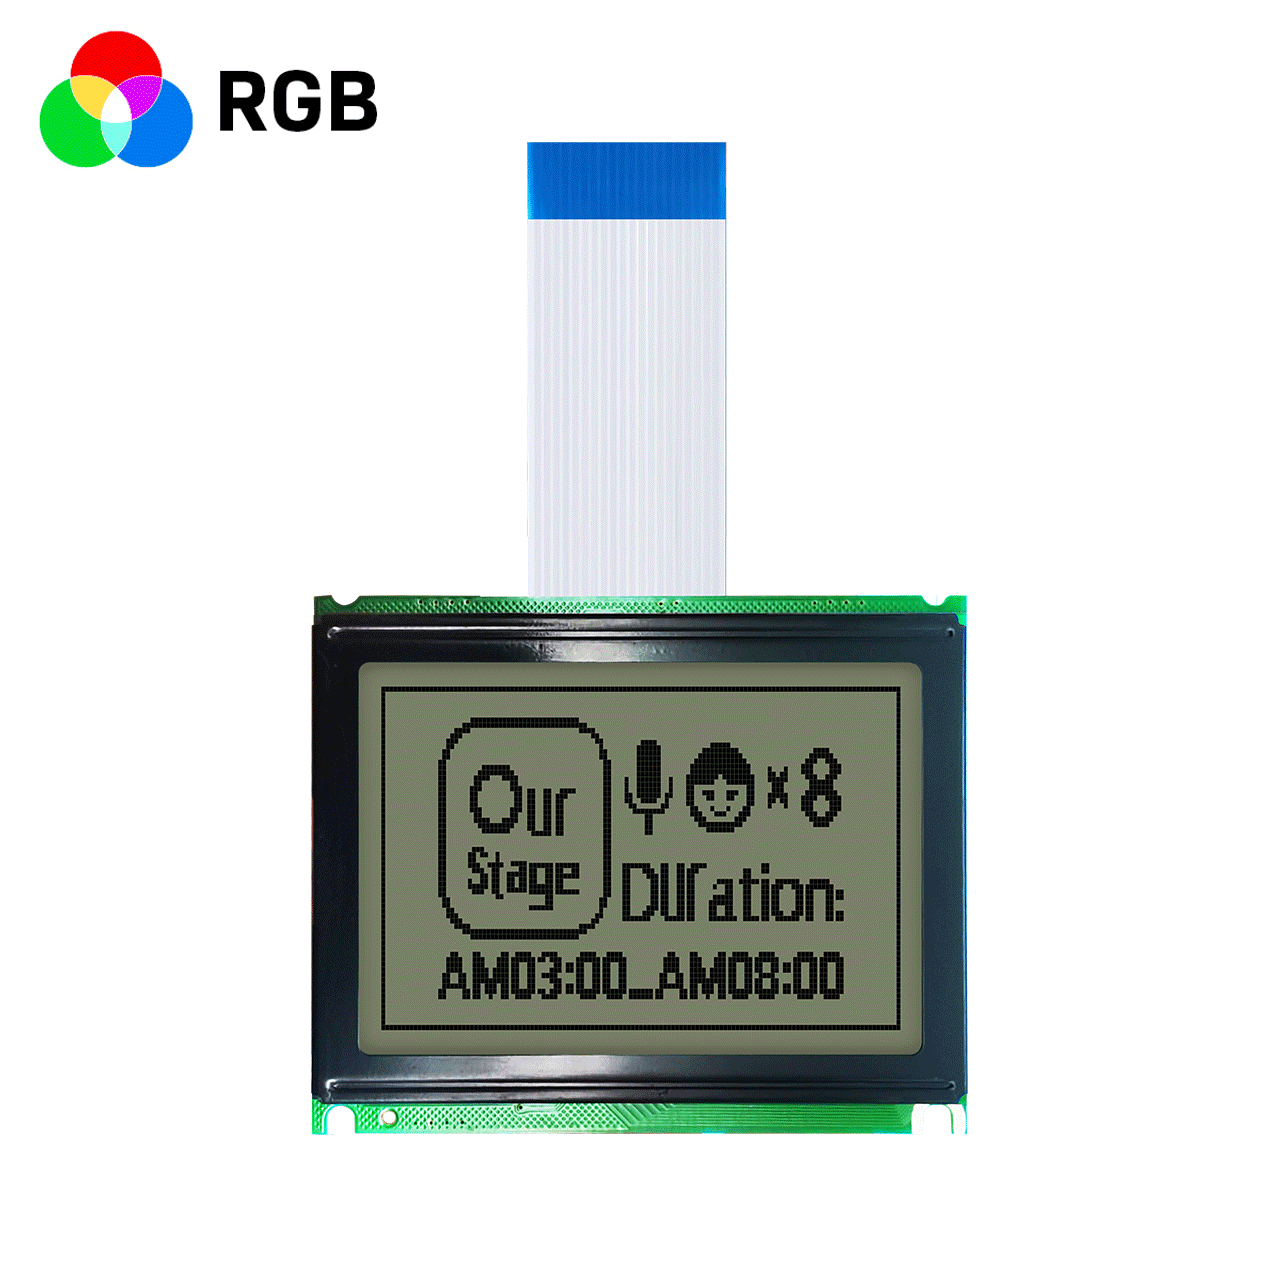 3-inch 128x64 Graphic LCD Display | 3.3V/5.0V | 12864 Graphic LCD Module | FSTN Positive Display | RGB Red, Green and Blue Backlight | Fully Transmissive Polarizer